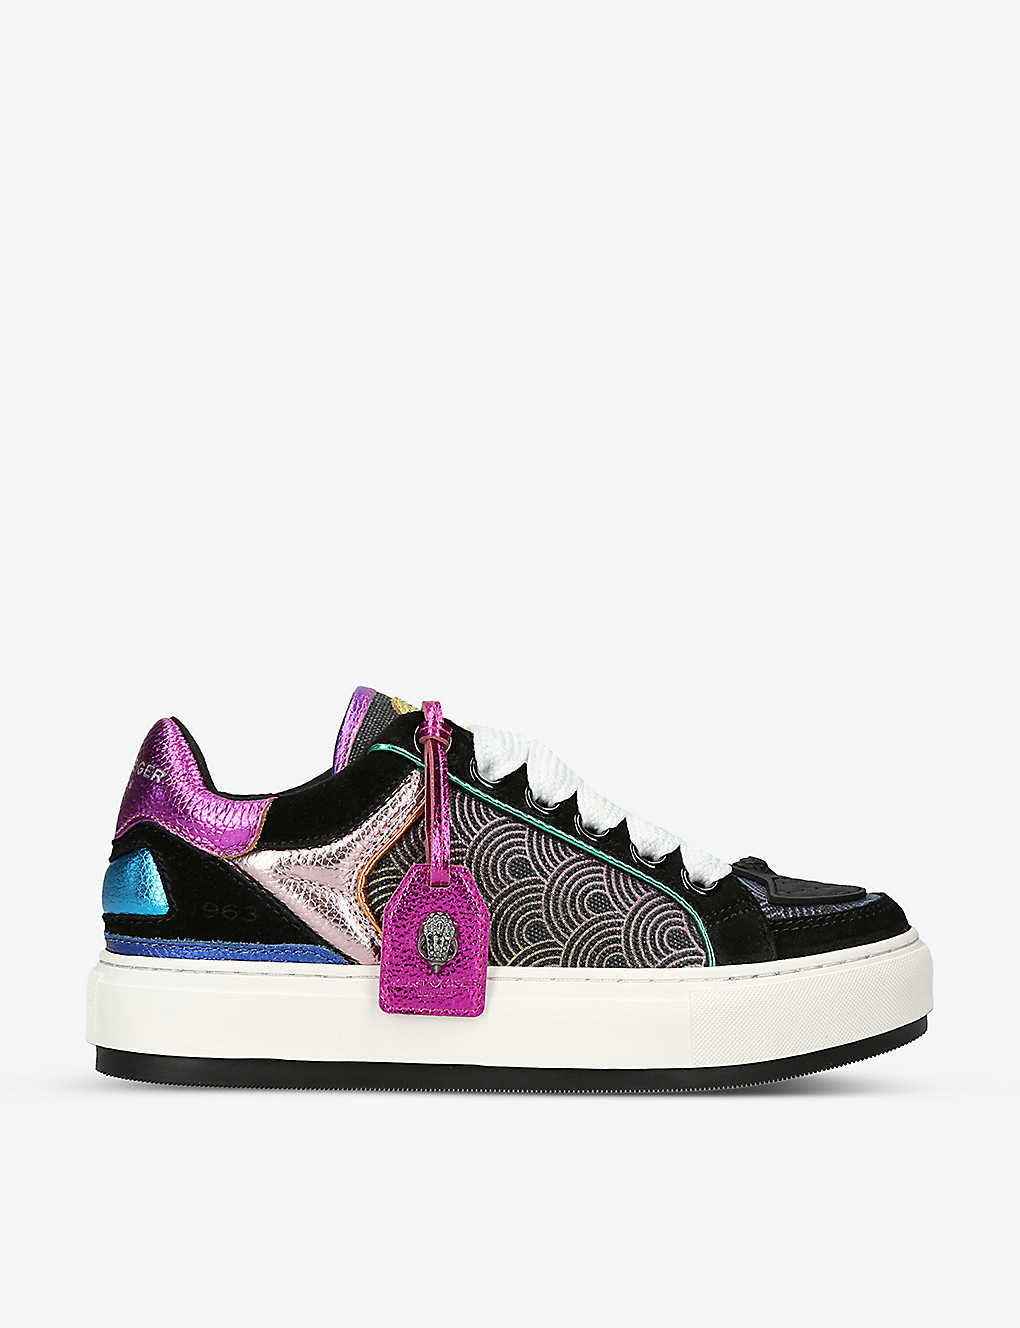 Shop Kurt Geiger London Women's Blk/other Southbank Tag Panelled Leather Low-top Trainers